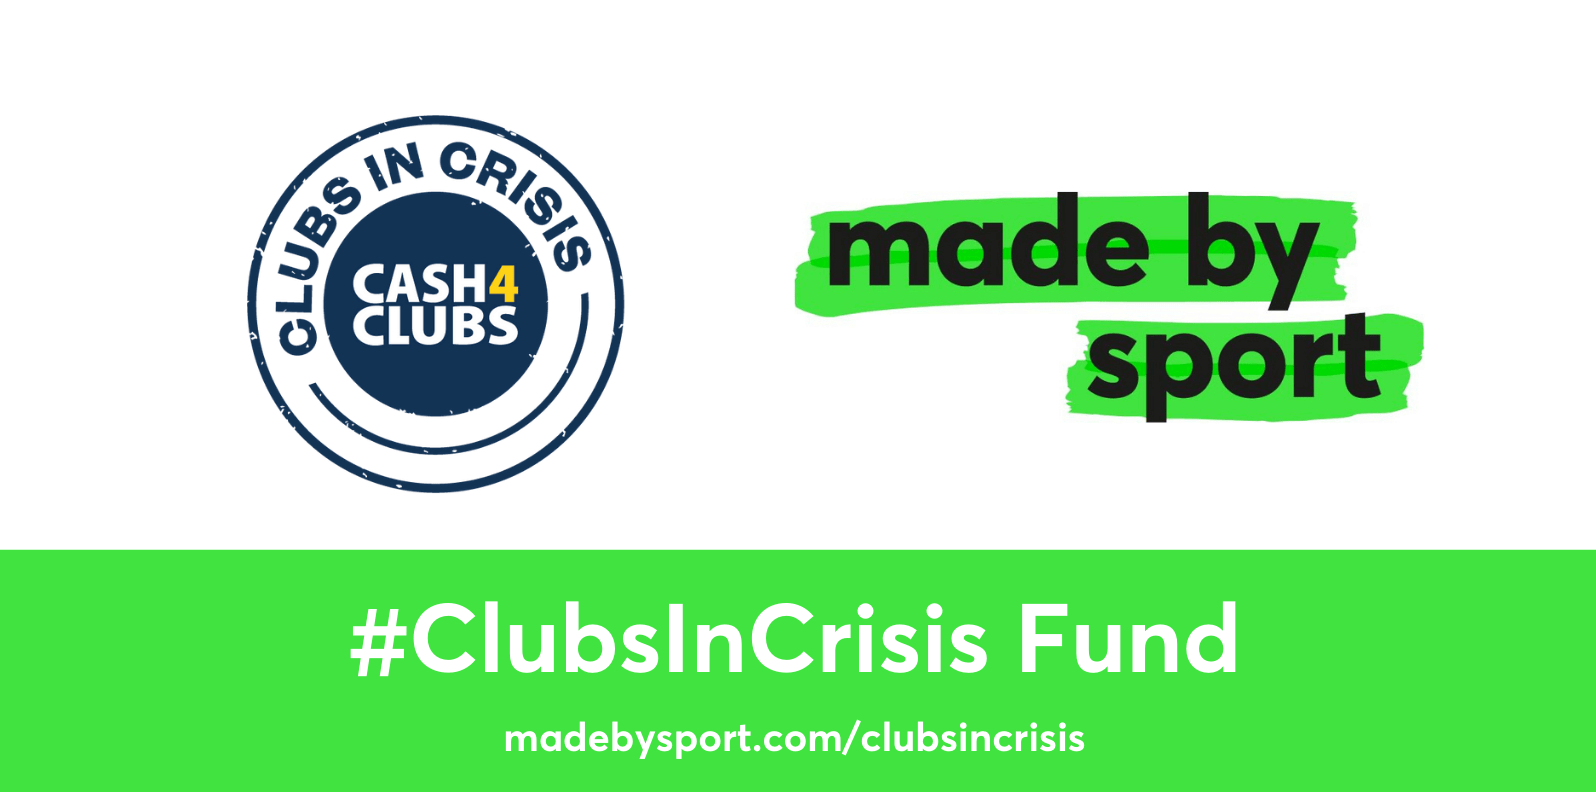 Cash 4 Clubs poster